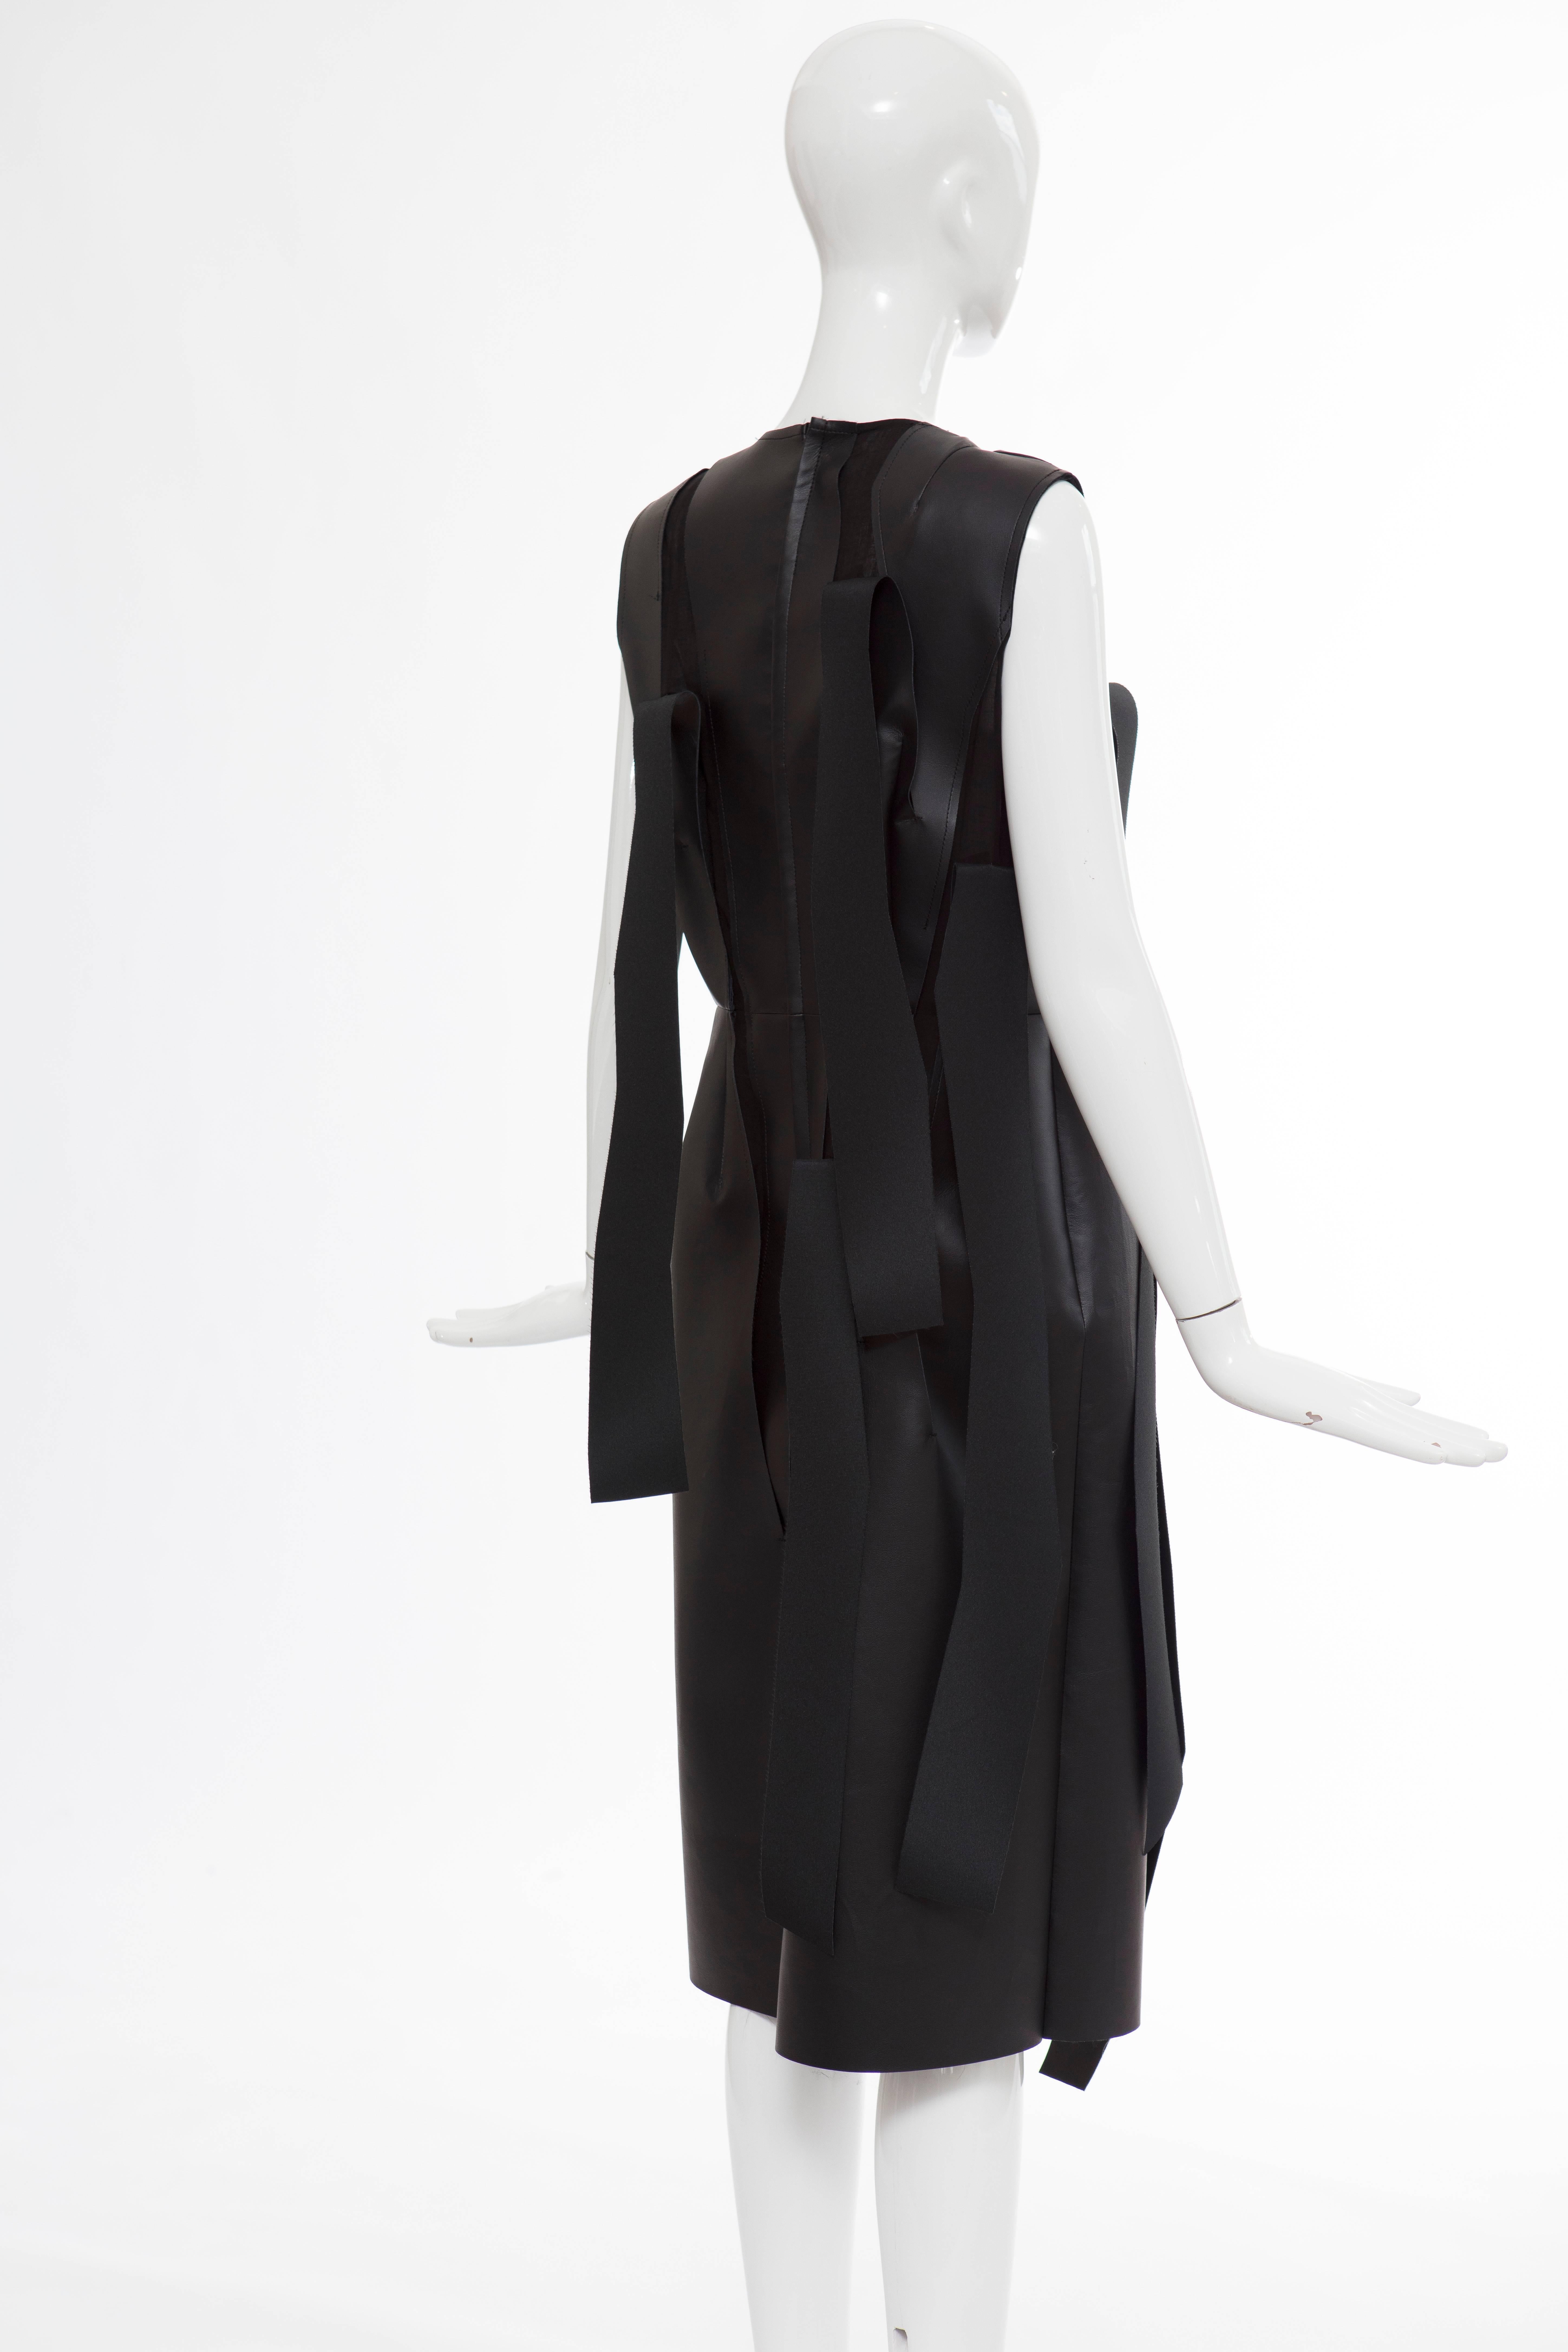 Comme des Garcons Black Synthetic Leather With Cutout Strips Dress, Circa 2014 3